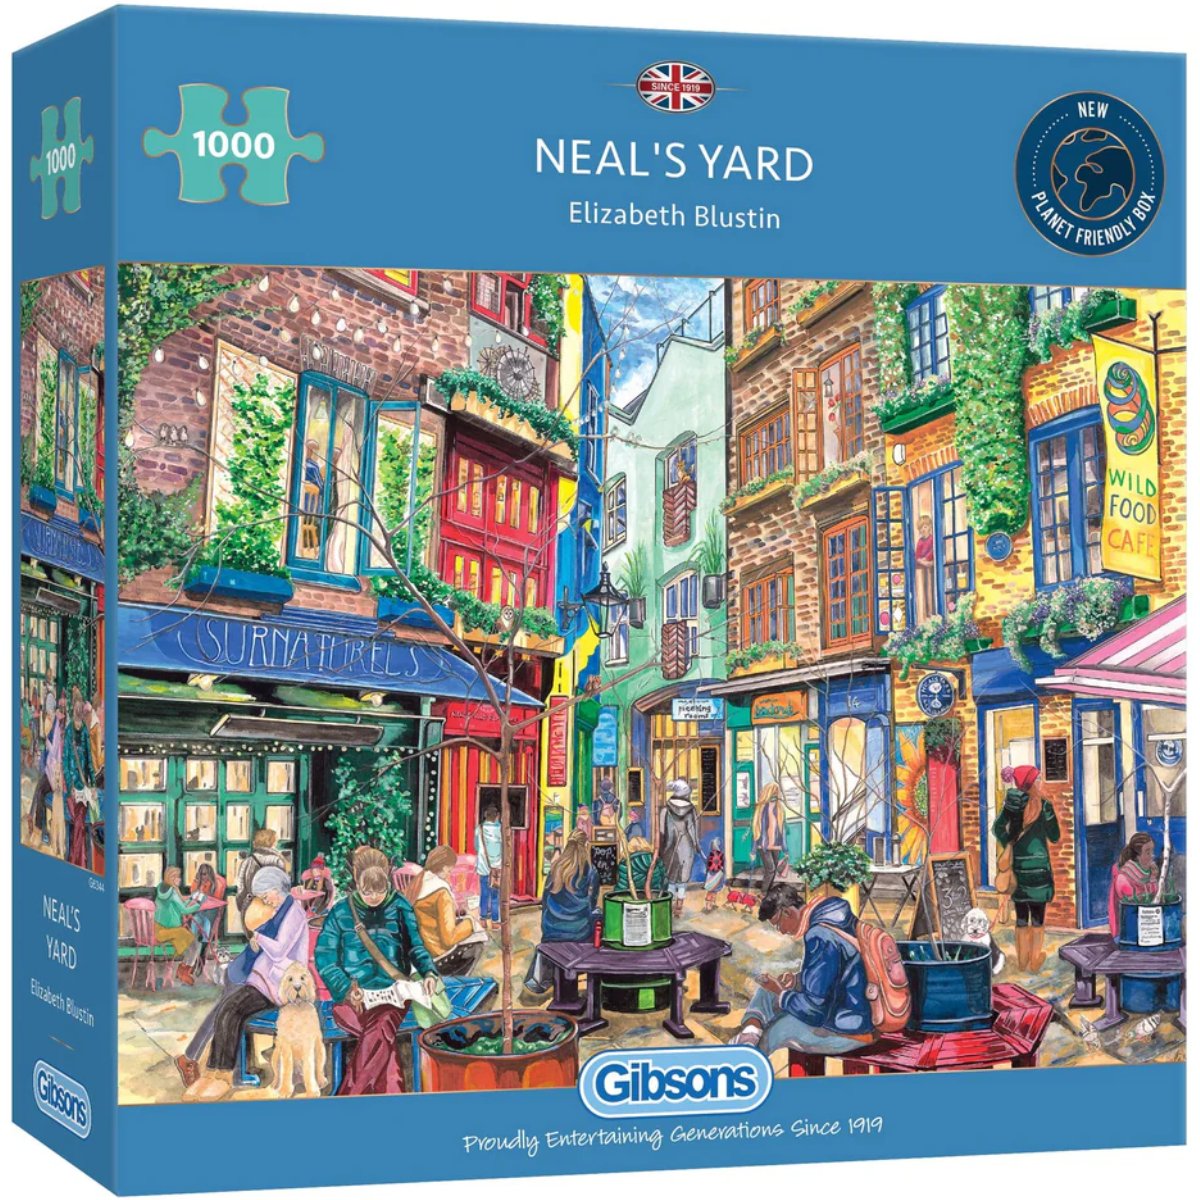 Neal's Yard - Gibsons 1000 Piece Jigsaw Puzzle - Phillips Hobbies